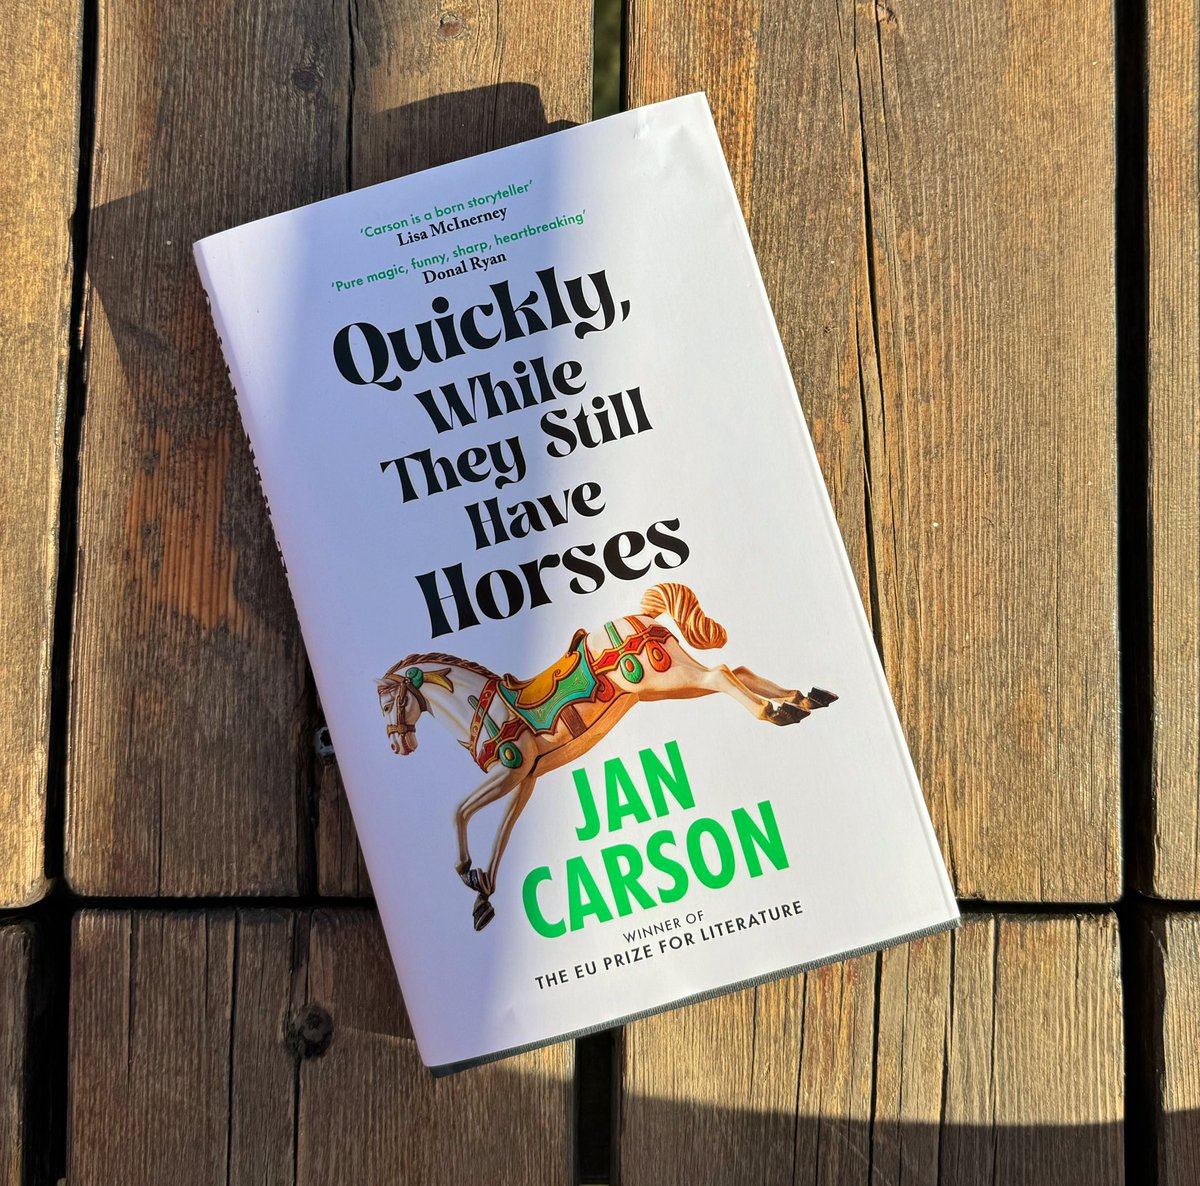 Ah, @JanCarson7280 #QuicklyWhileTheyStillHaveHorses is a properly wonderful thing…thank you! #Books #Reading